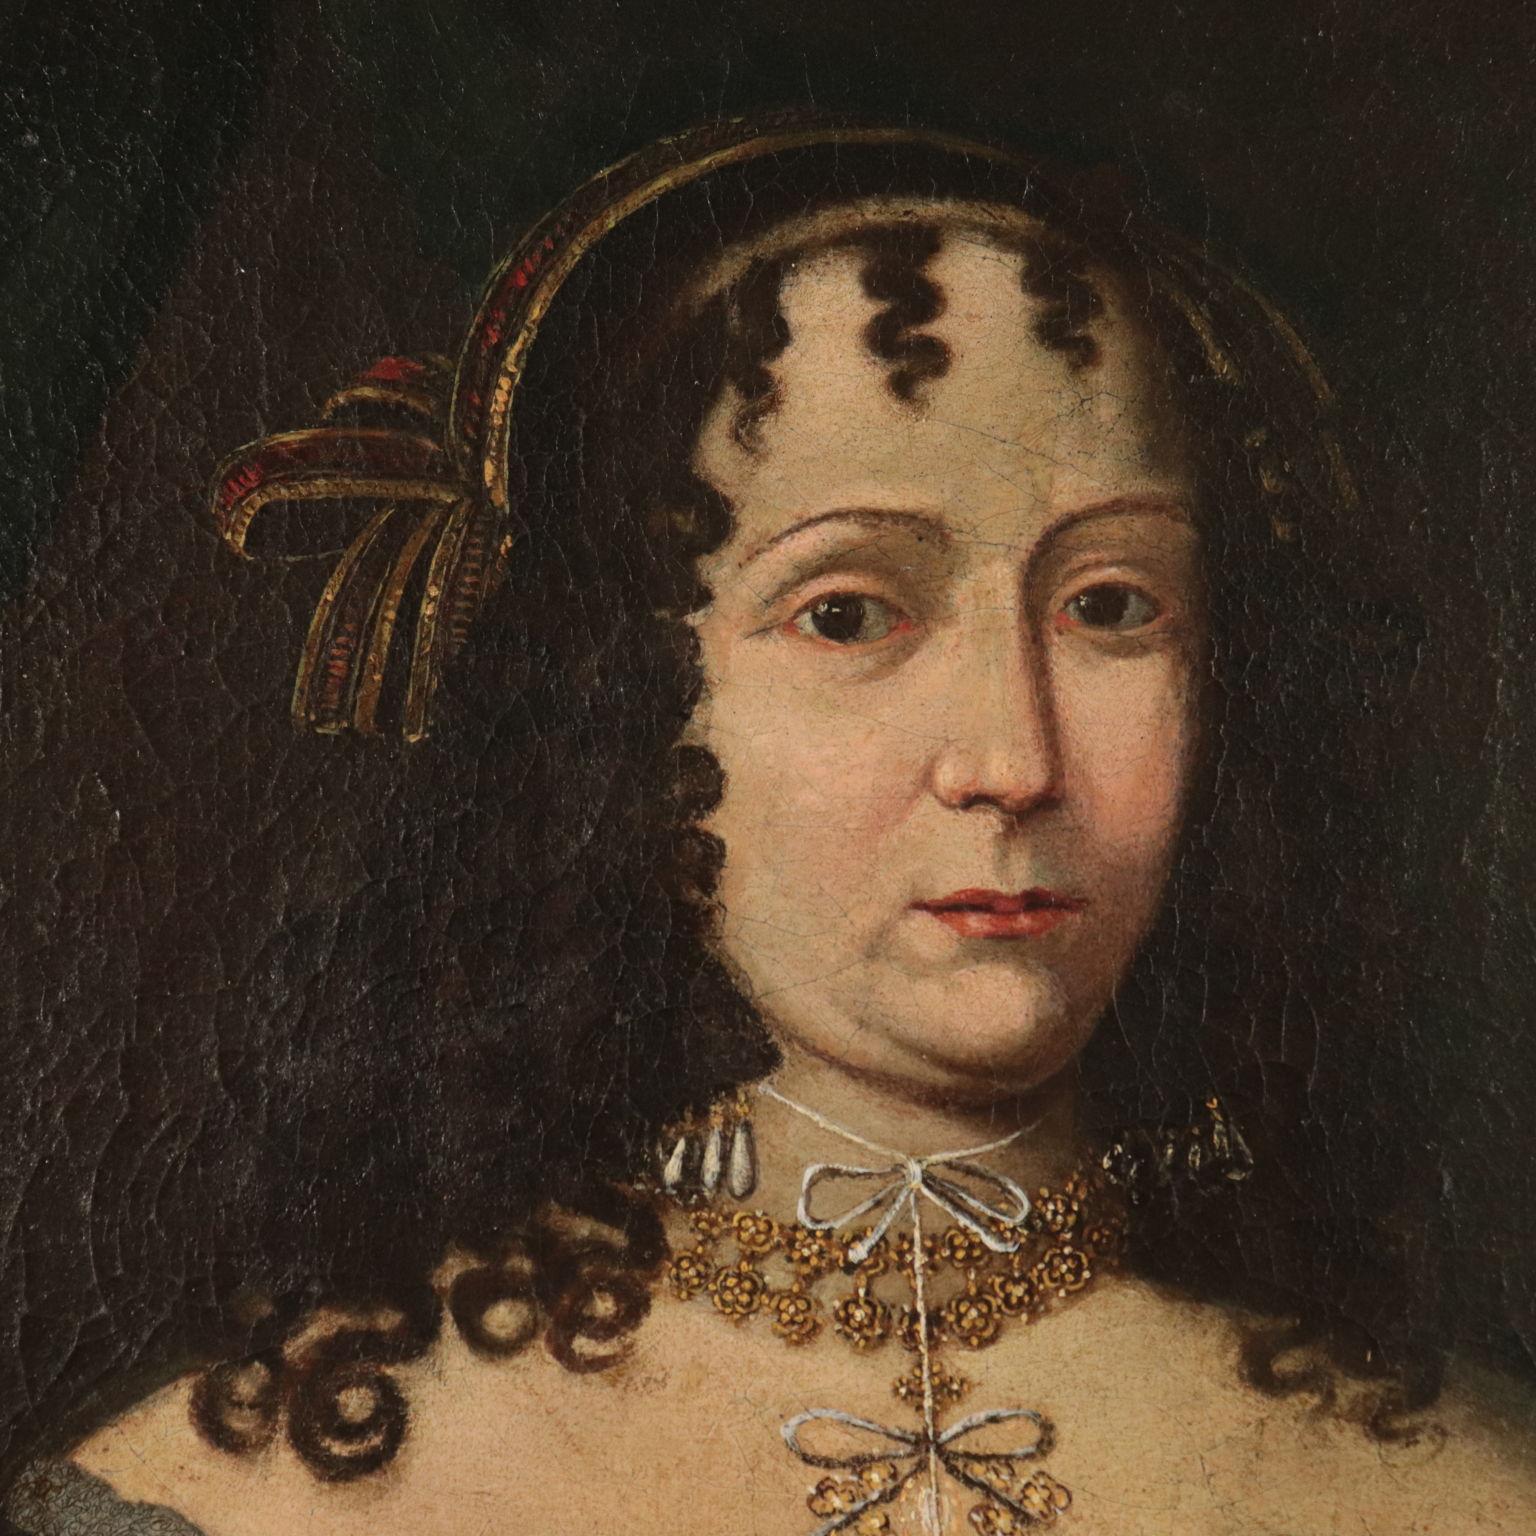 Portrait of a Noblewoman, Oil on Canvas, 17th Century - Black Portrait Painting by Unknown